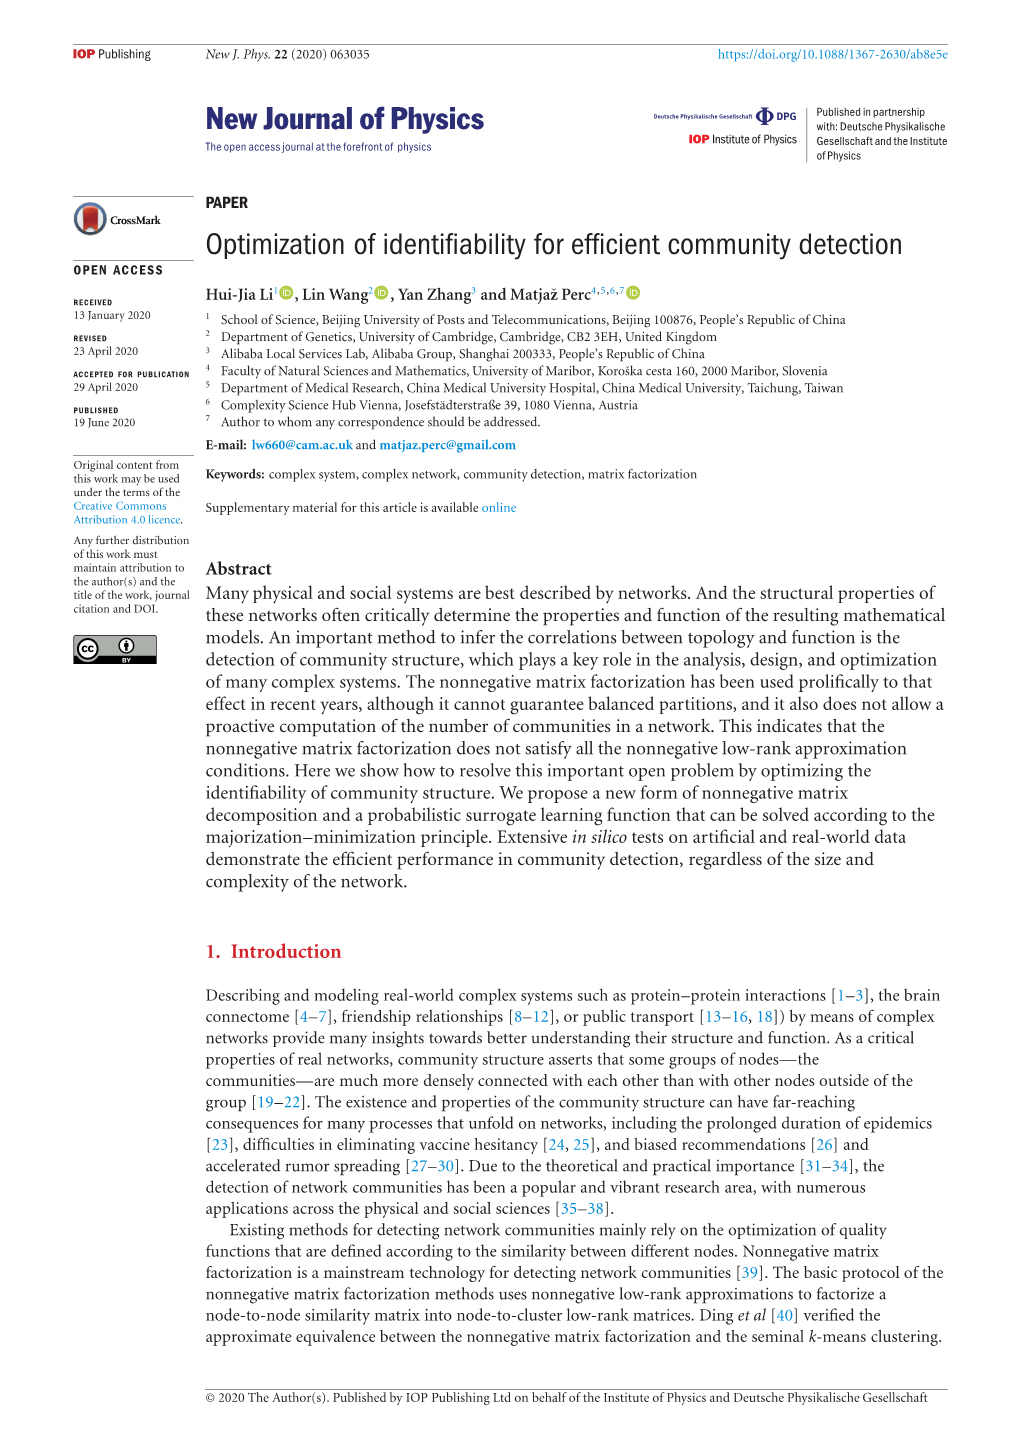 Optimization of Identifiability for Efficient Community Detection